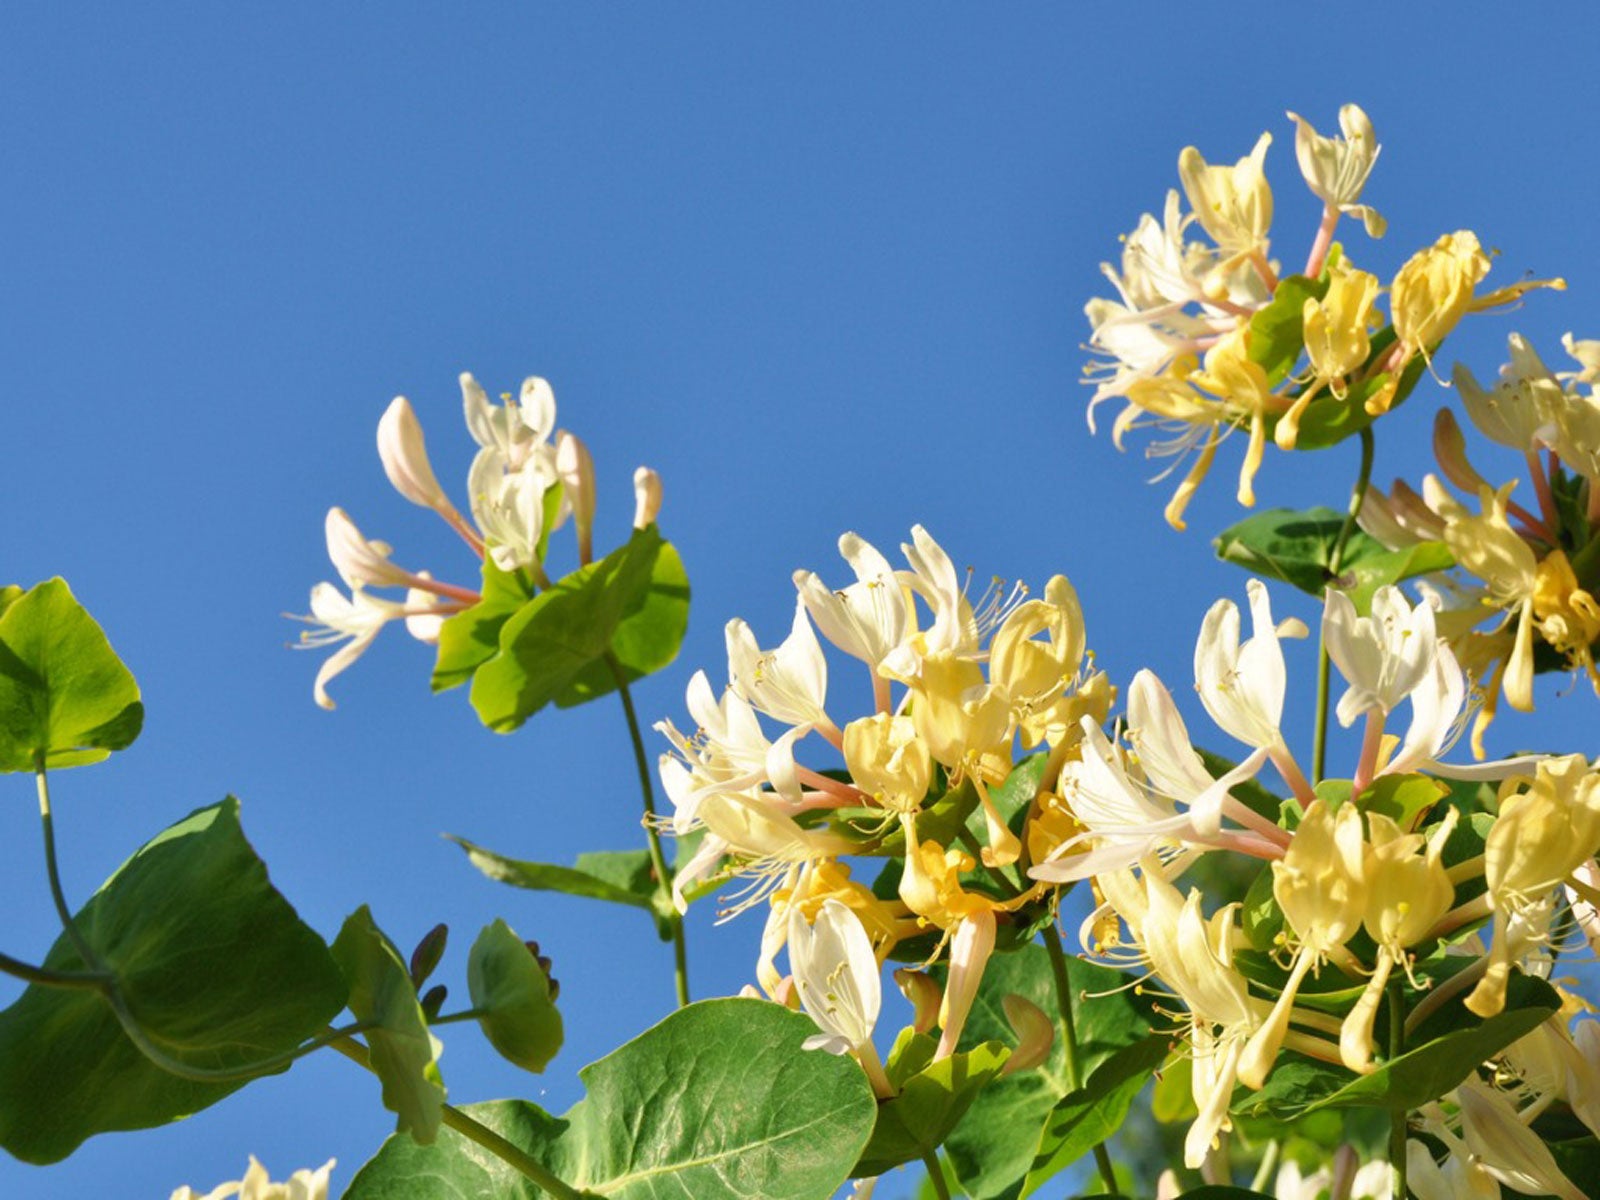 The Honeysuckle Plant   Growing And Caring For Honeysuckle Vines